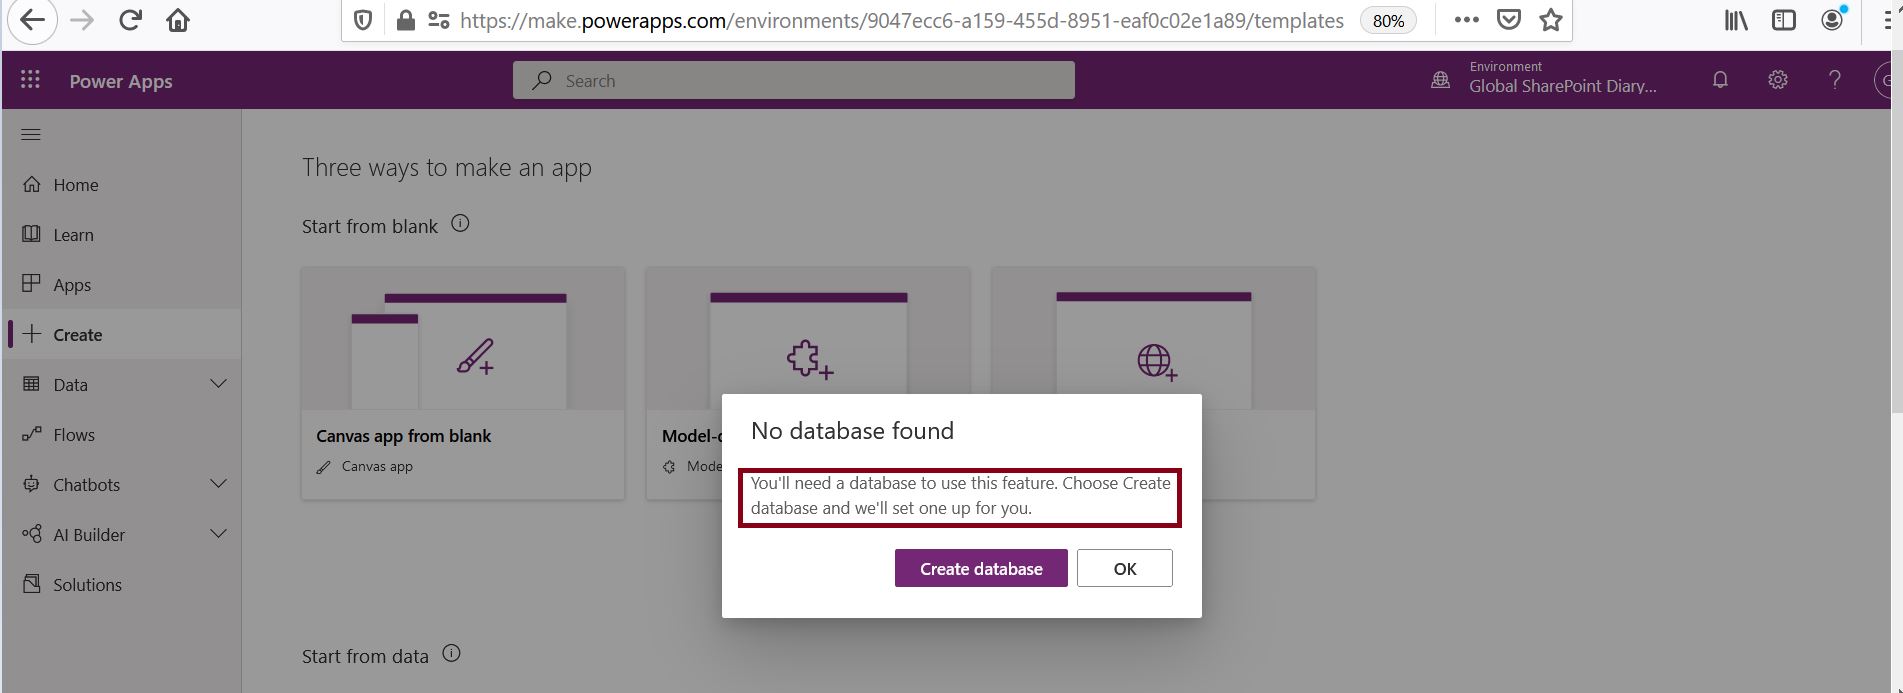 No database found - create database in PowerApps